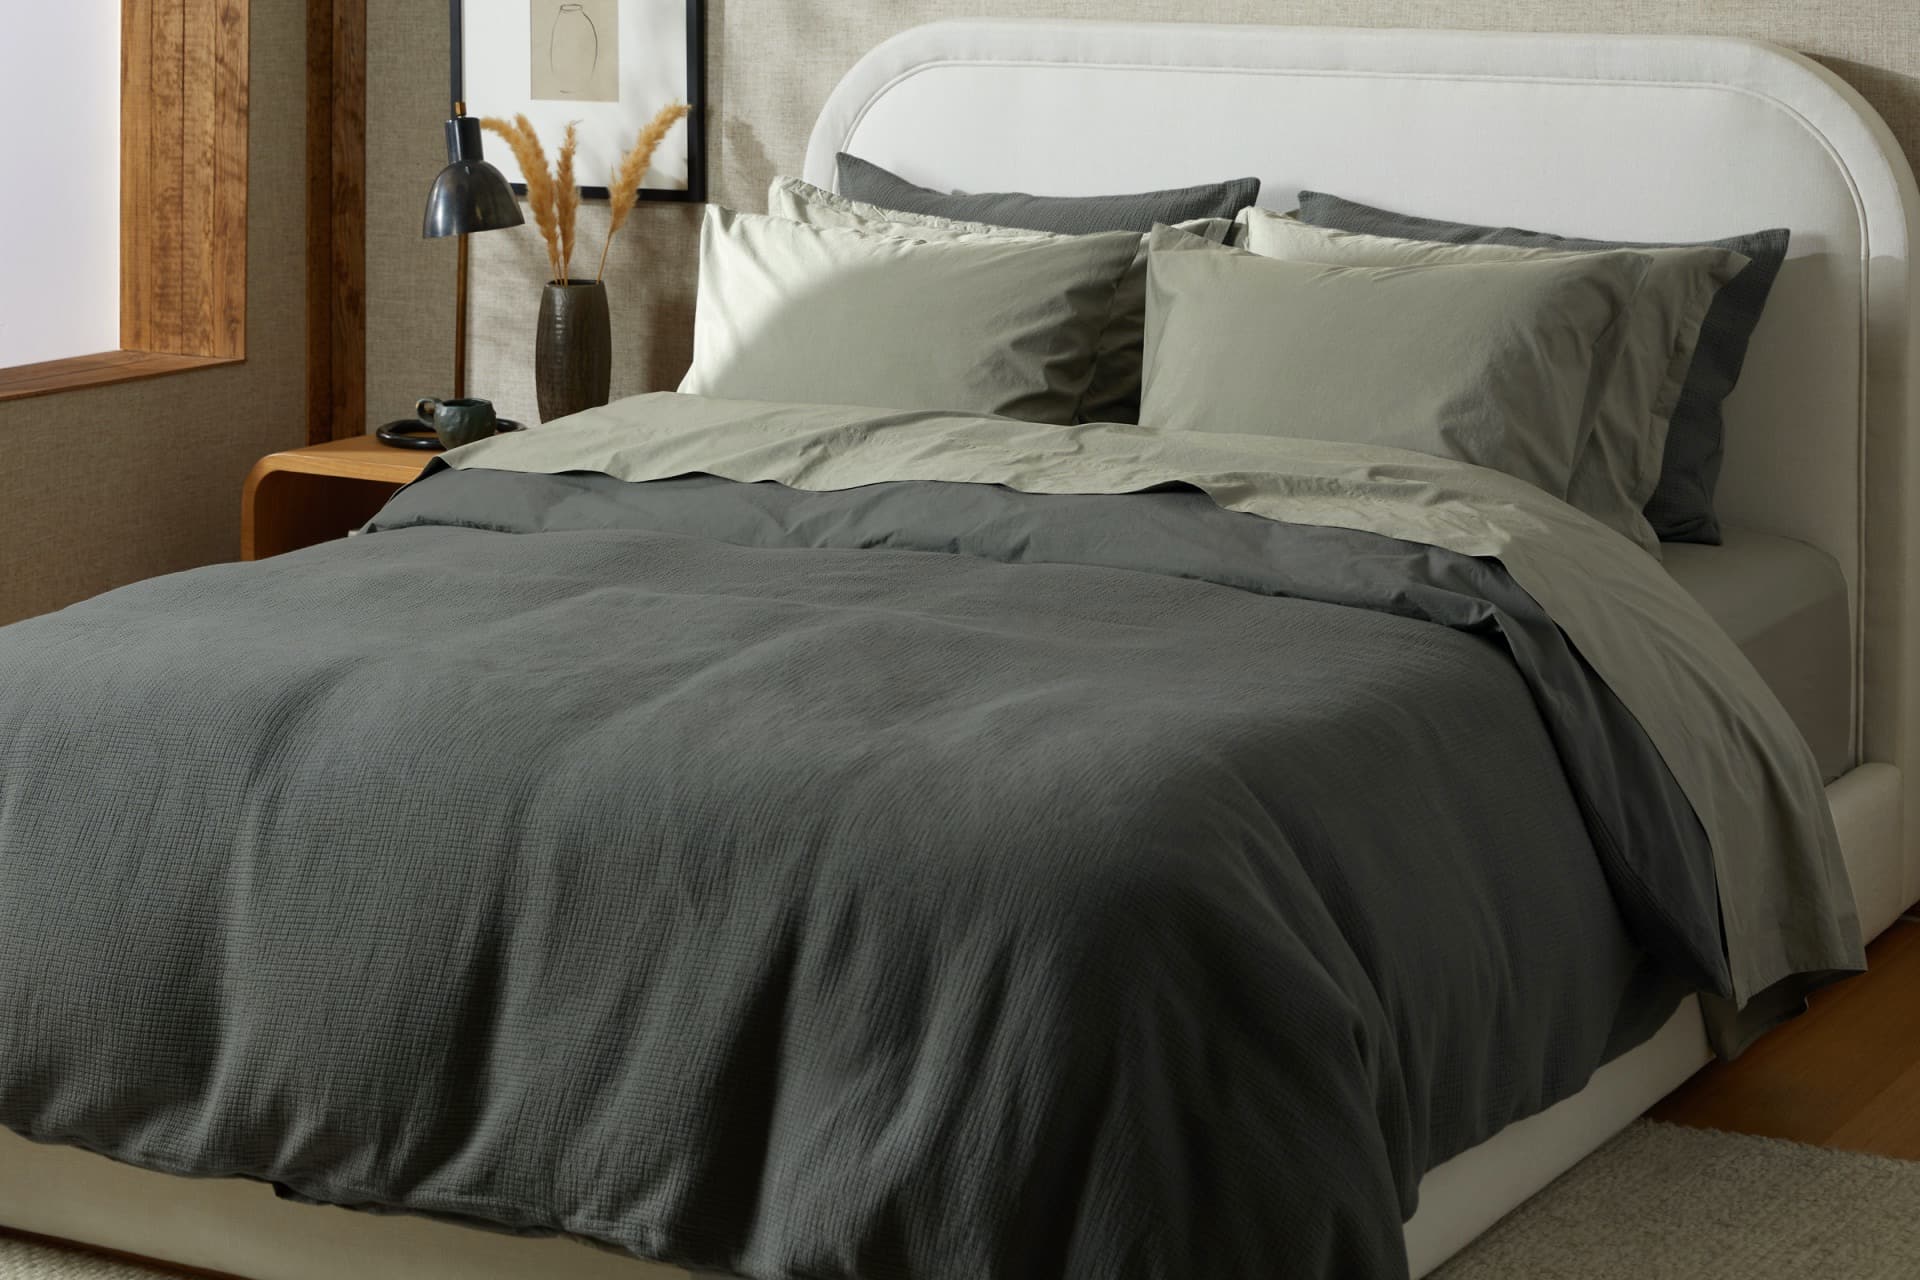 Best Percale Sheets for 2022 (In-Depth Reviews)